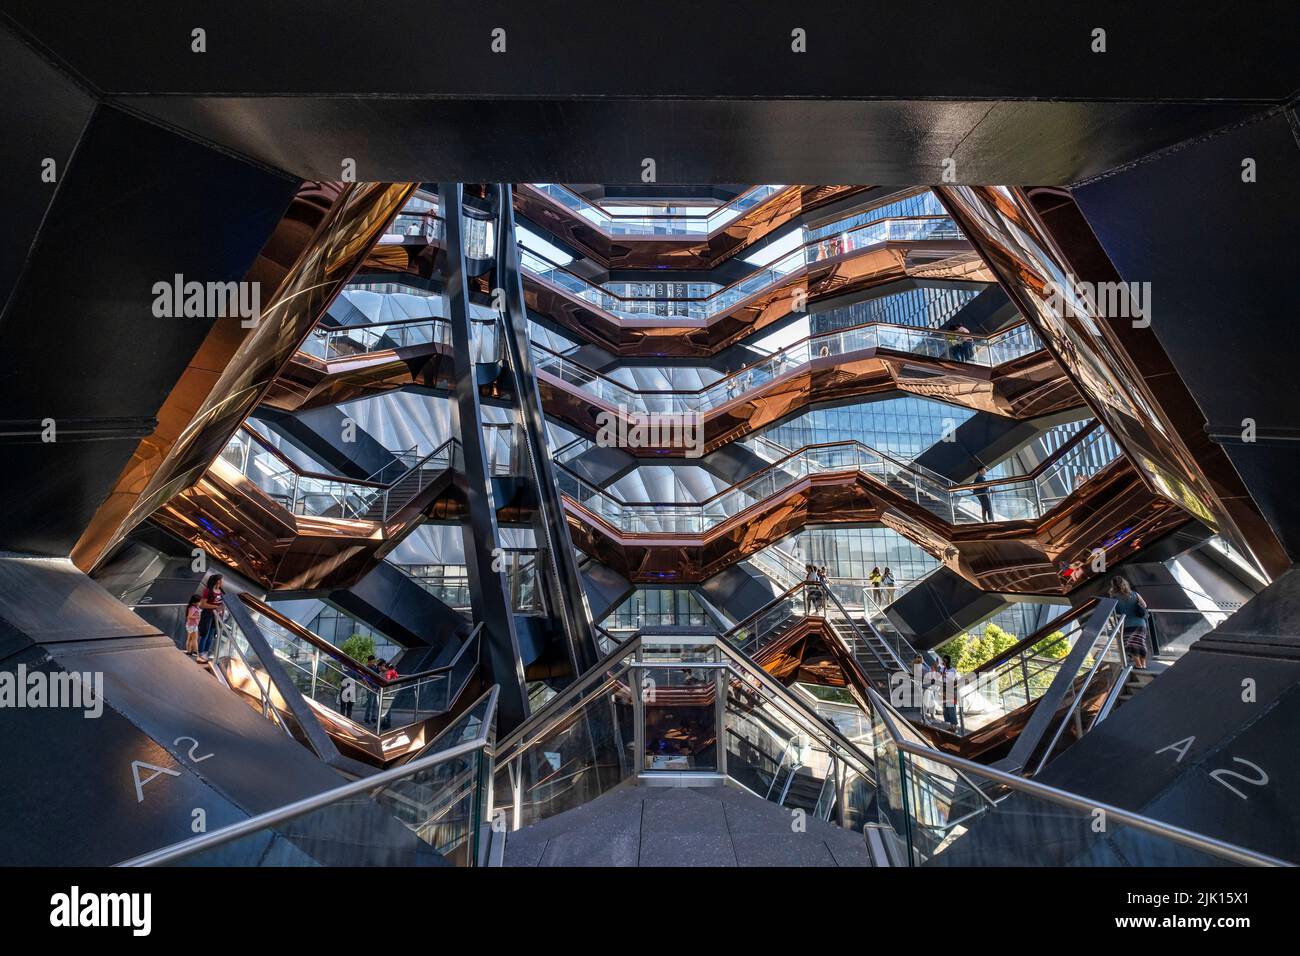 View from inside The Vessel, Hudson Yards, Manhattan, New York City, New York, United States of America, North America Stock Photo